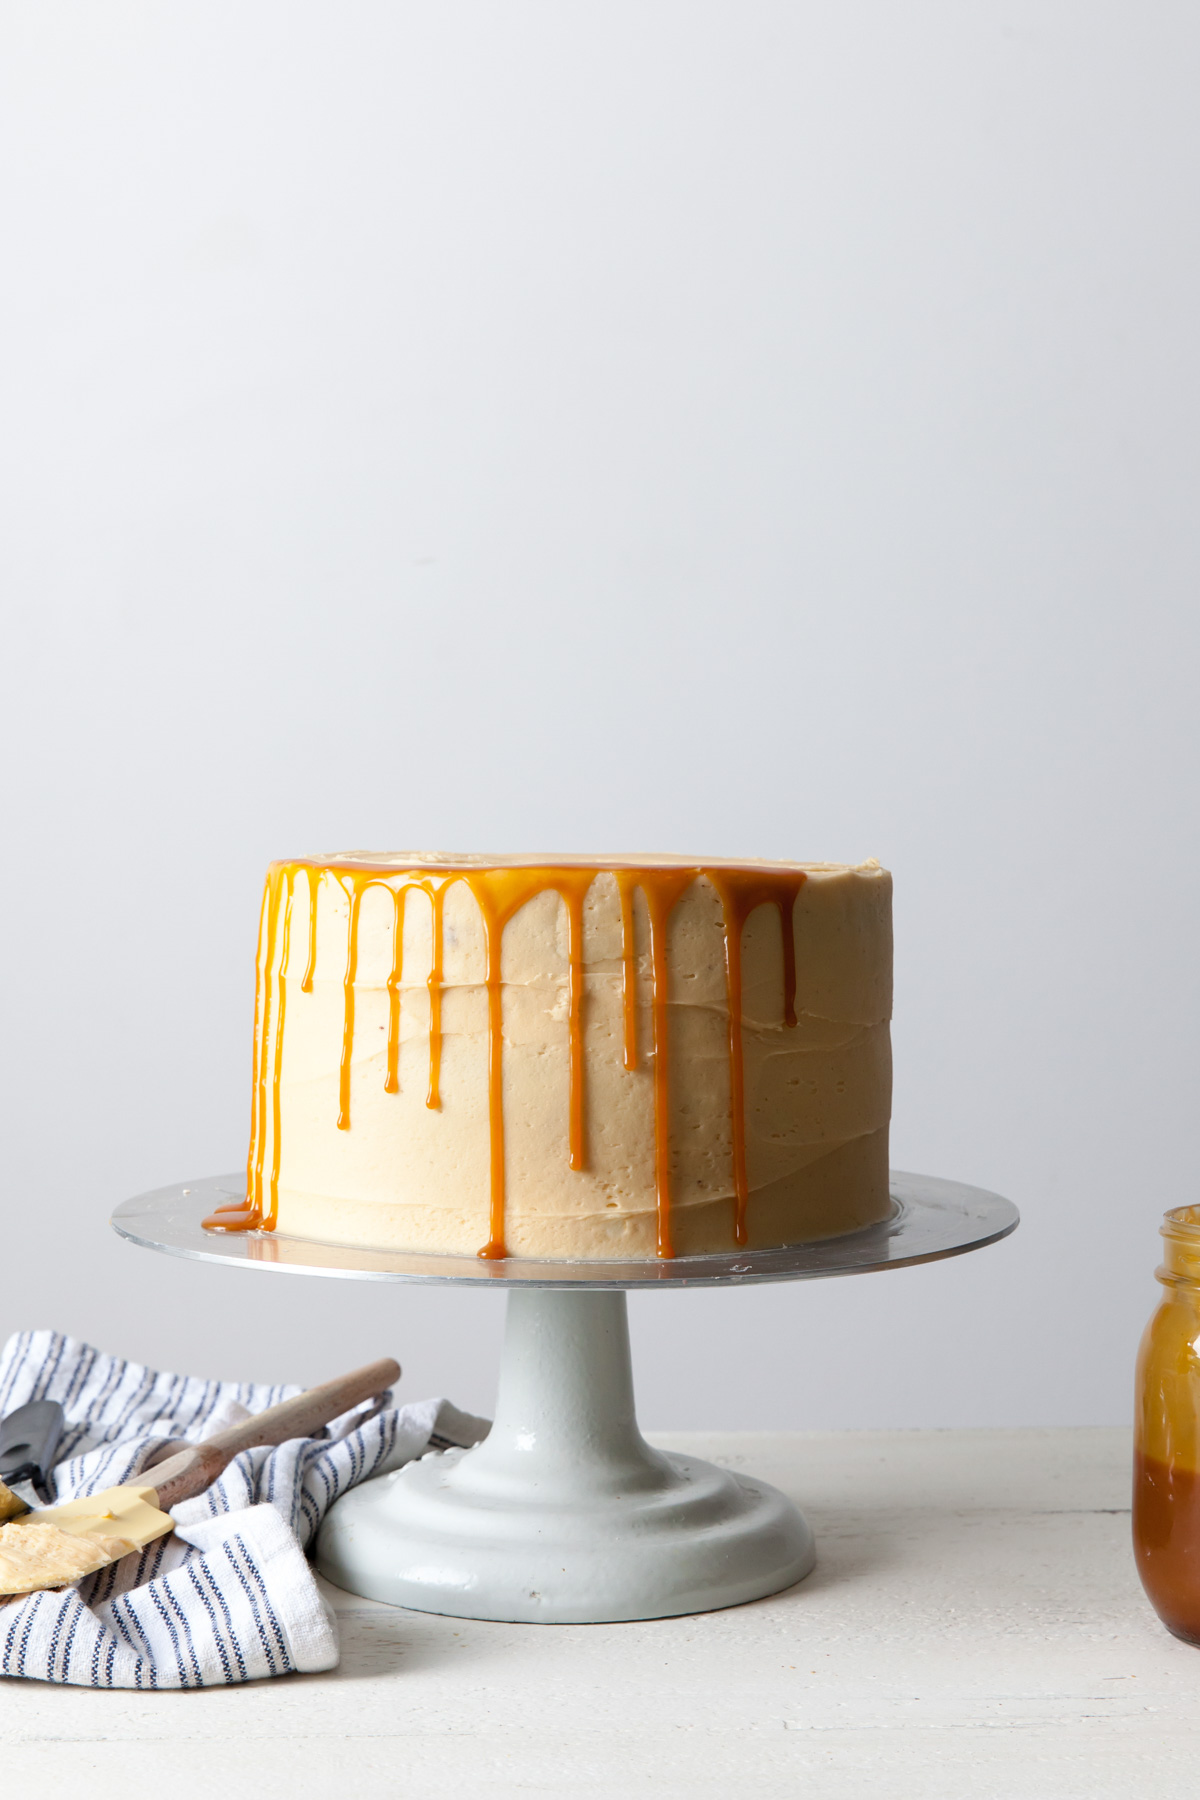 Adding caramel drips to a layer cake